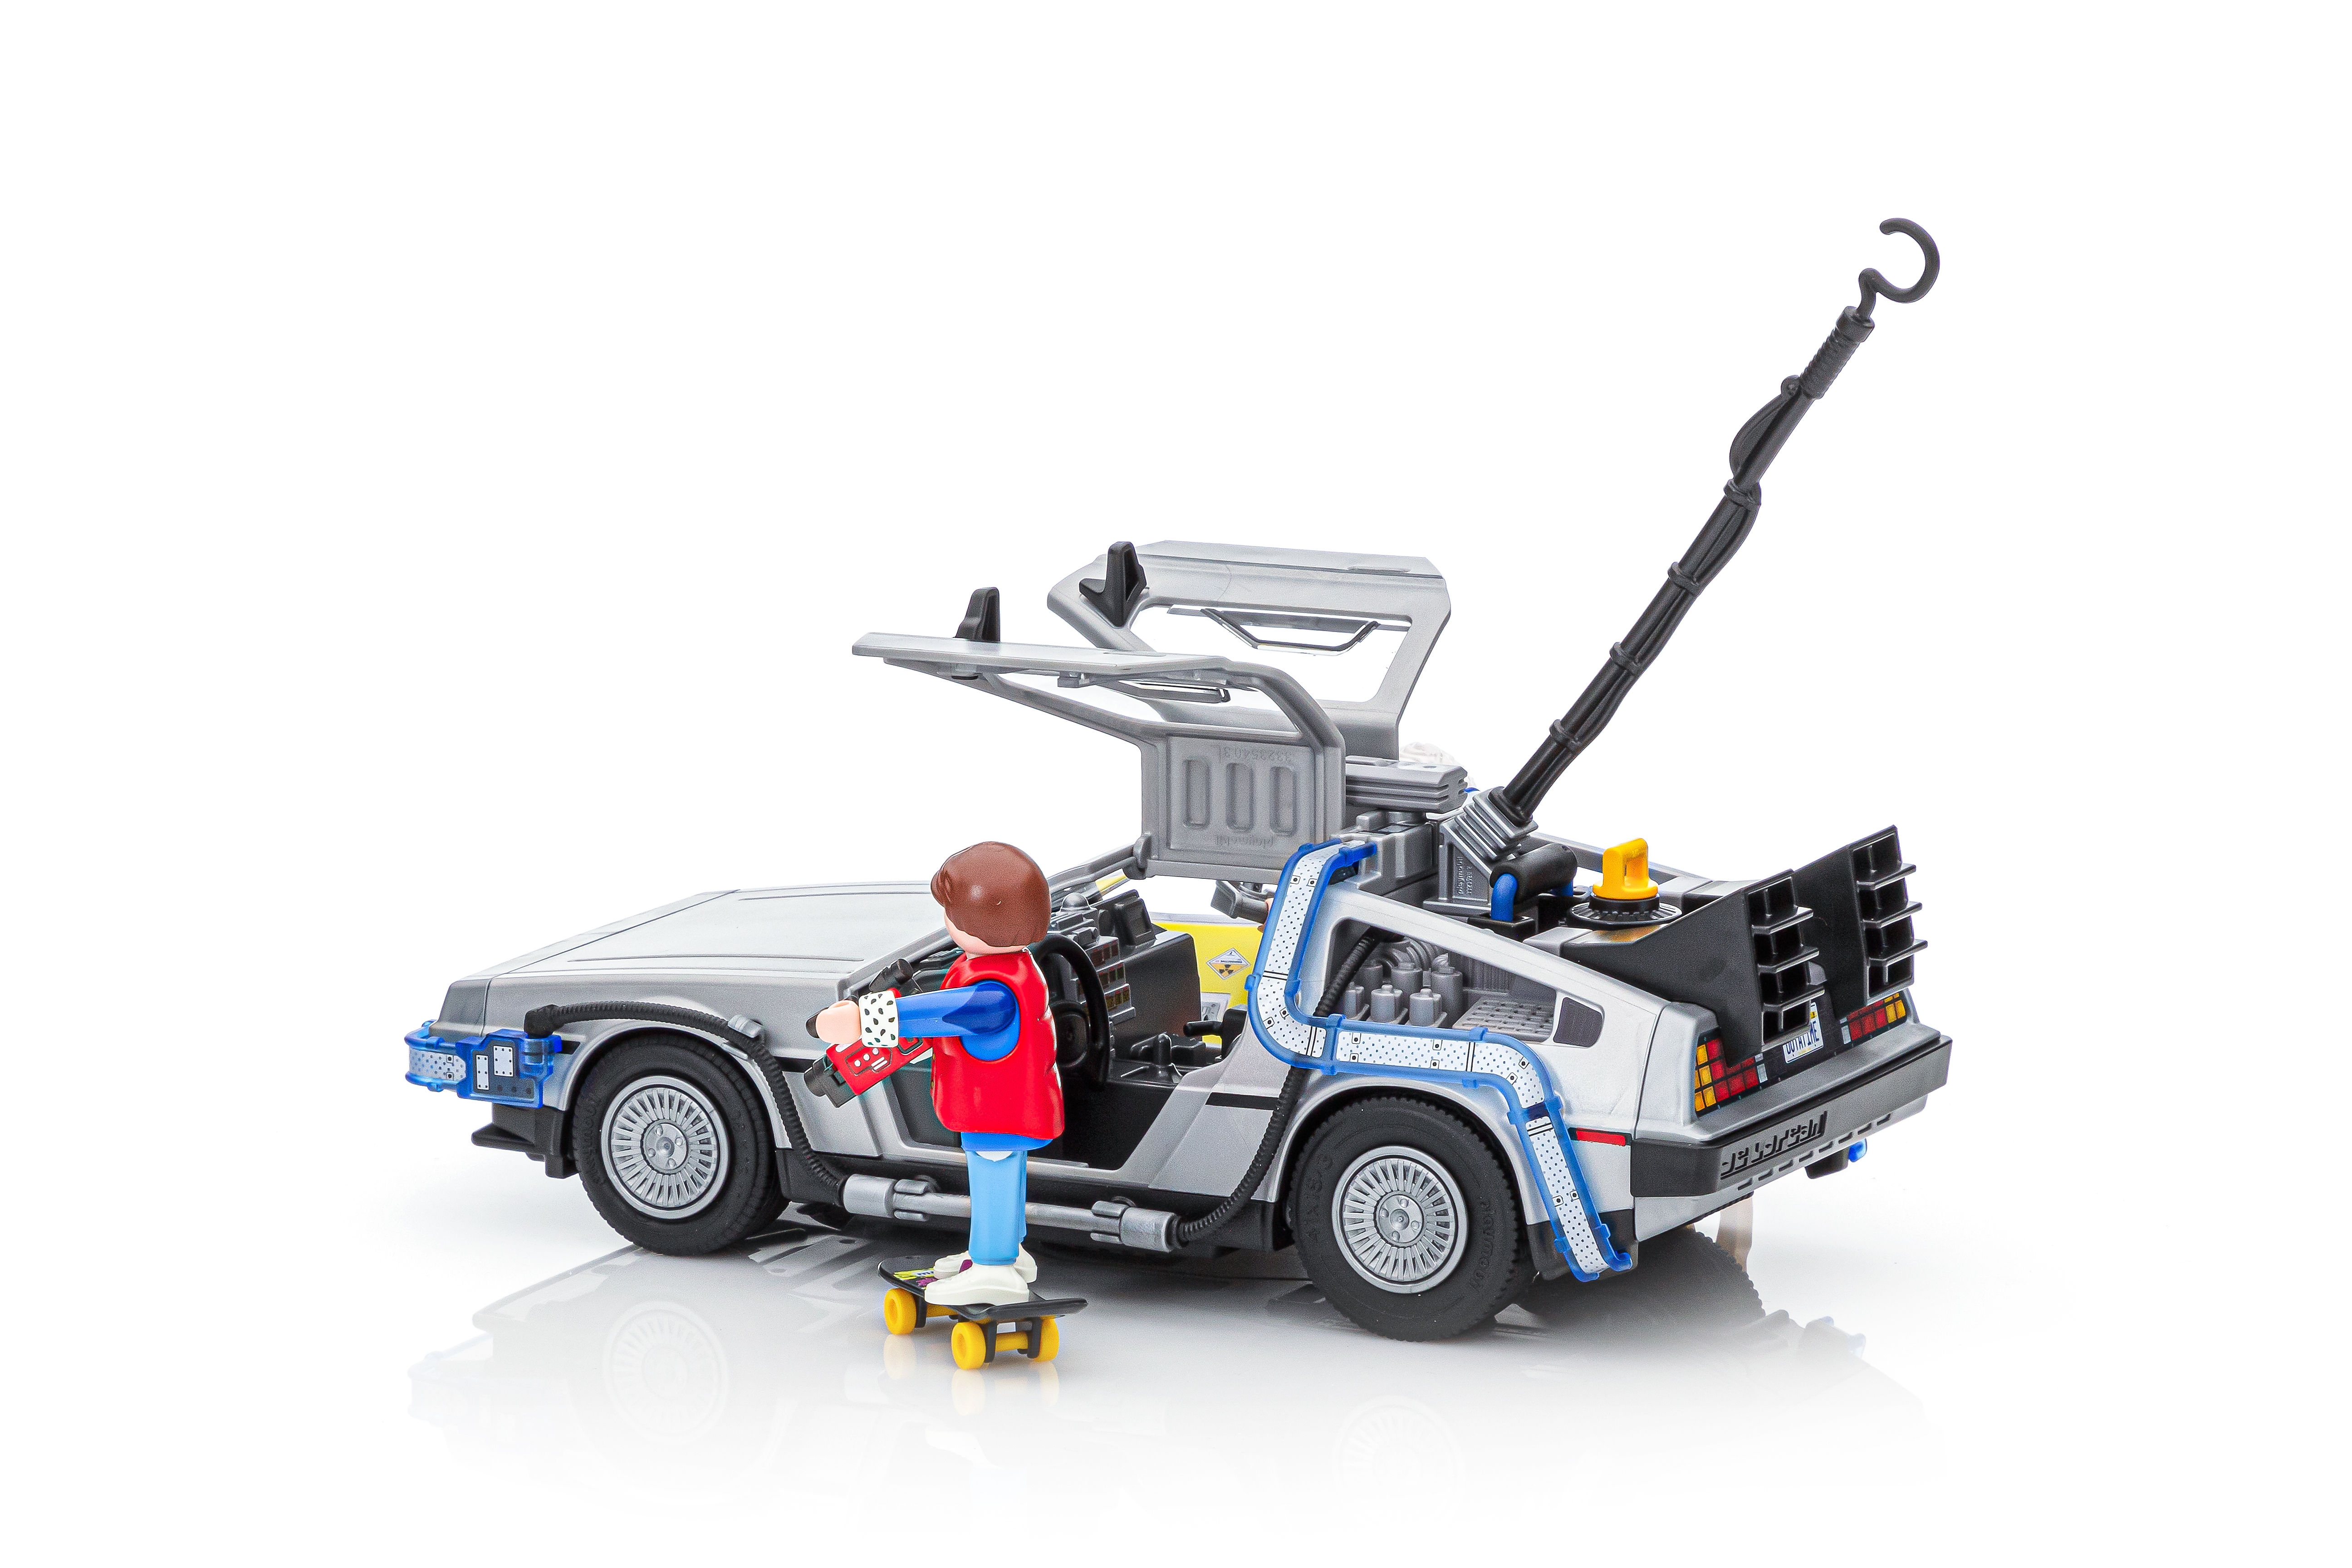 Playmobil Back to the Future DeLorean Vehicle Playset 700317